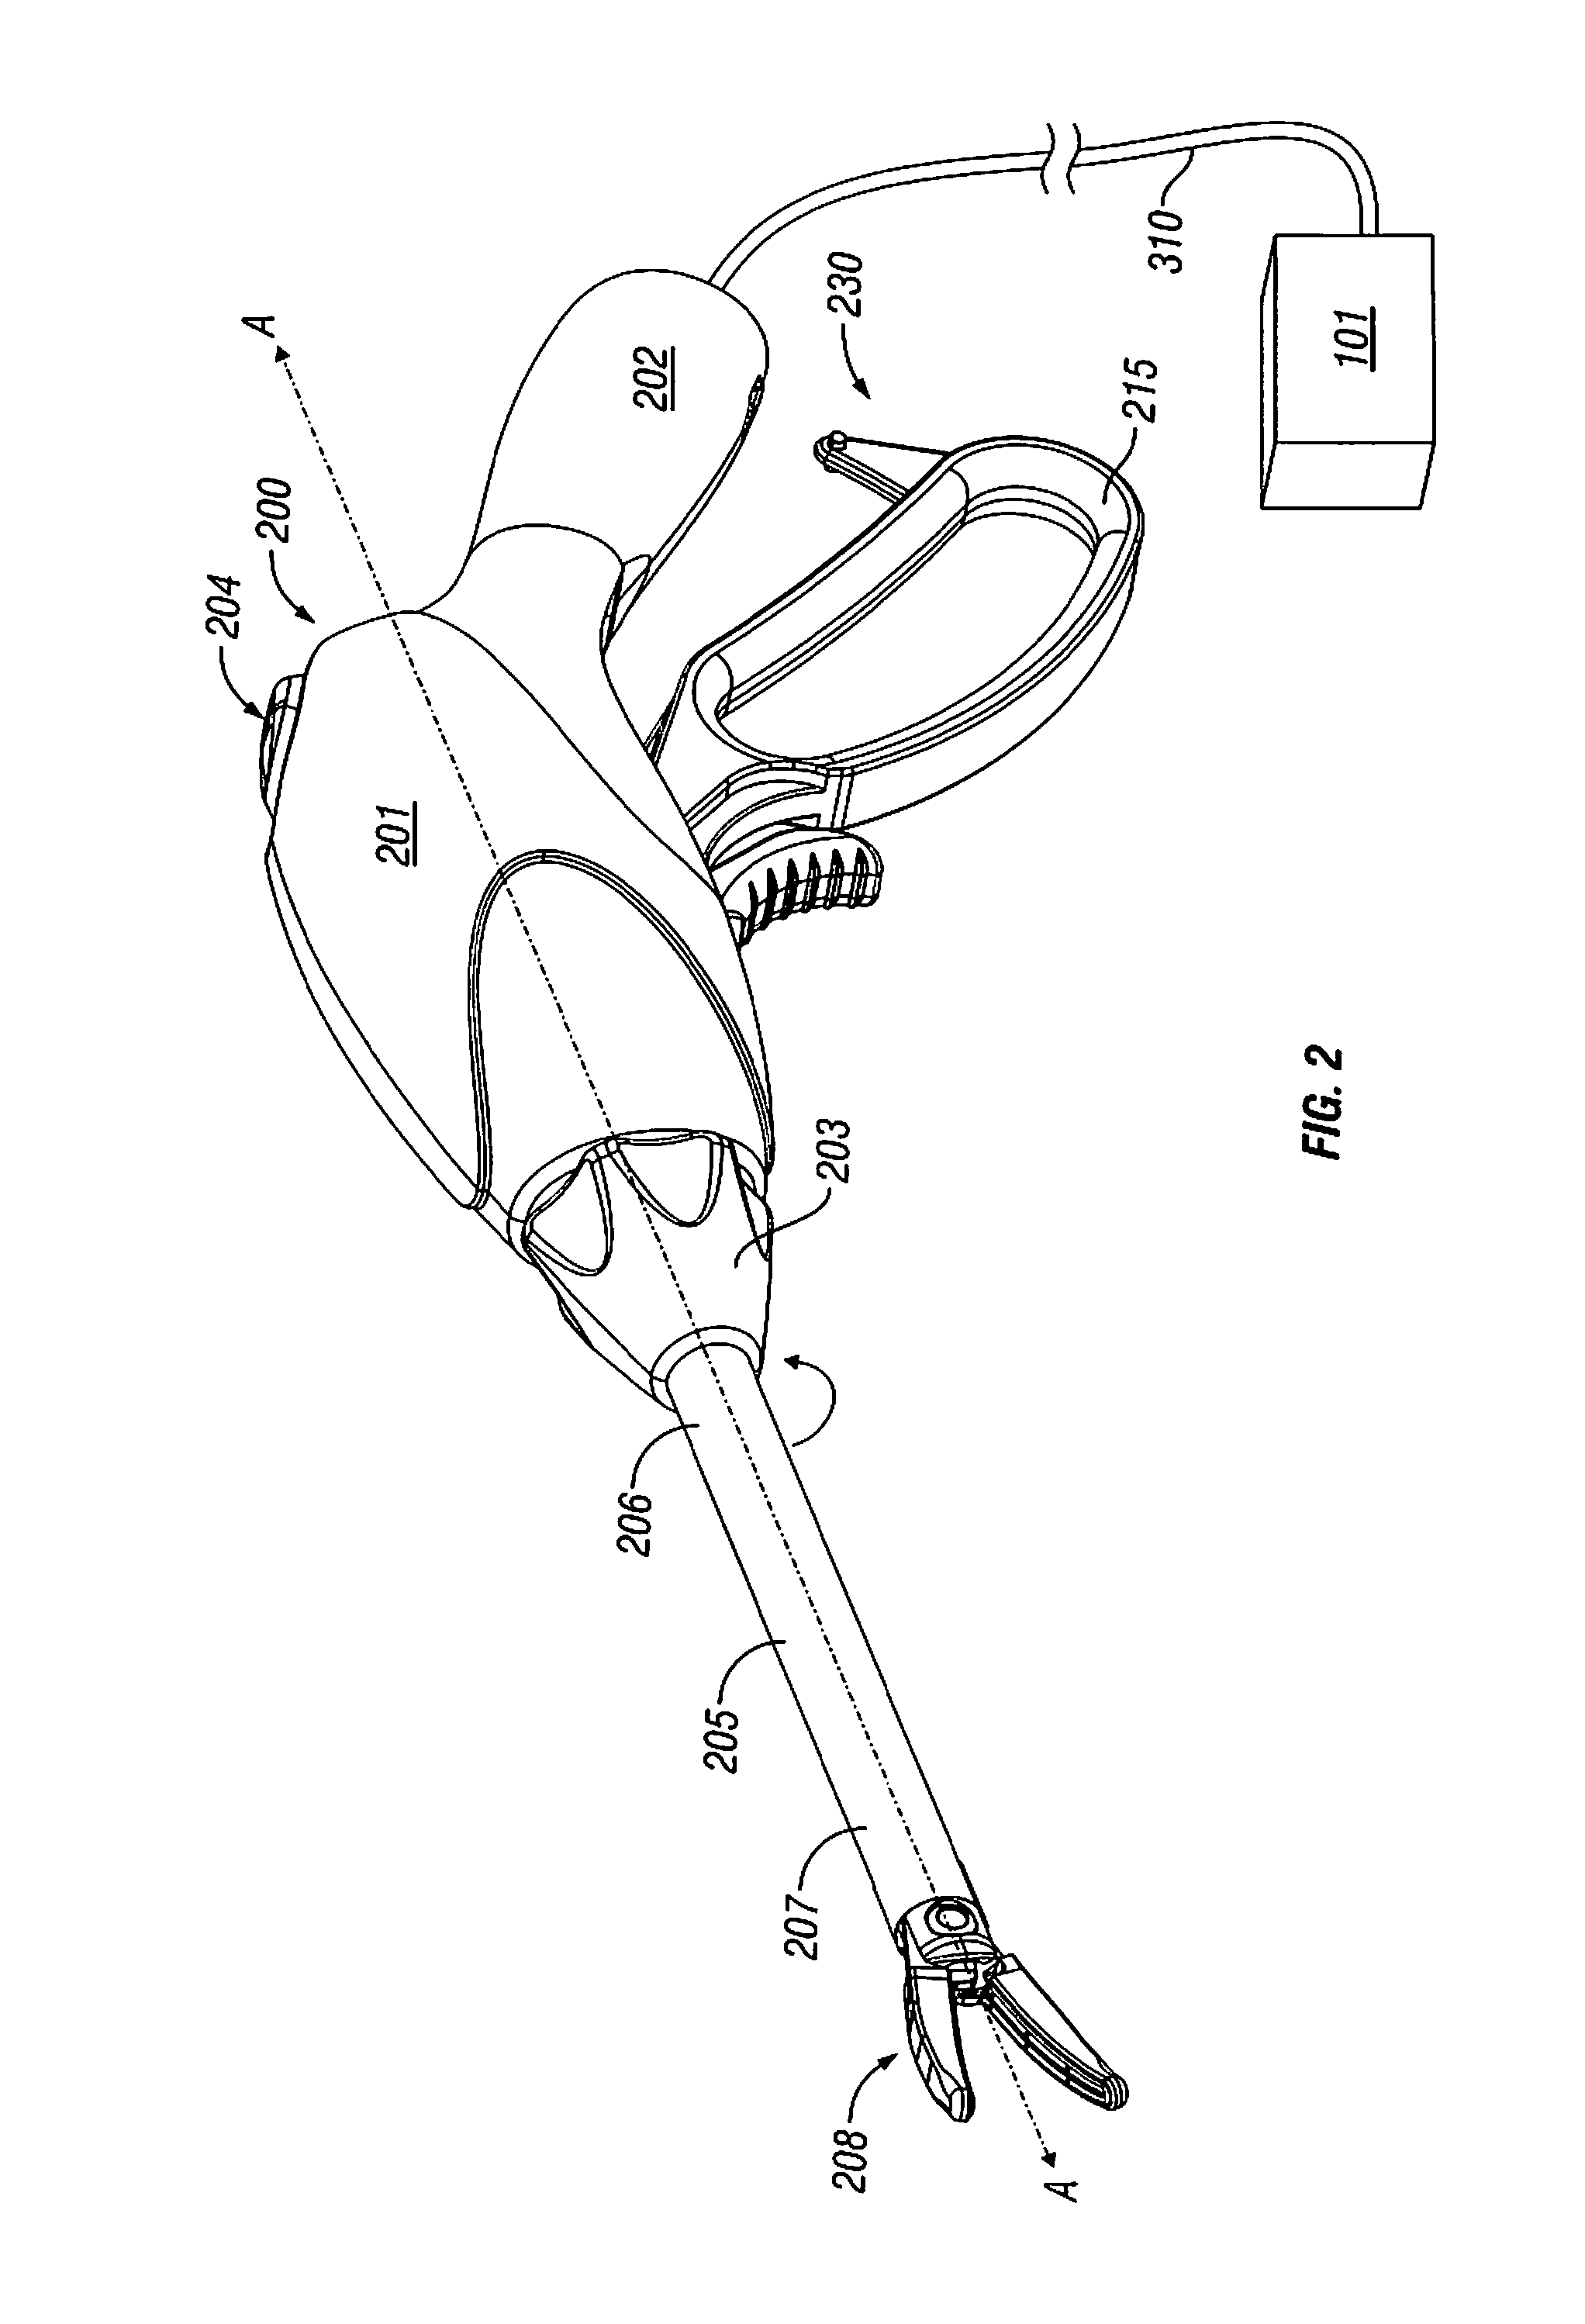 Method and system for monitoring tissue during an electrosurgical procedure